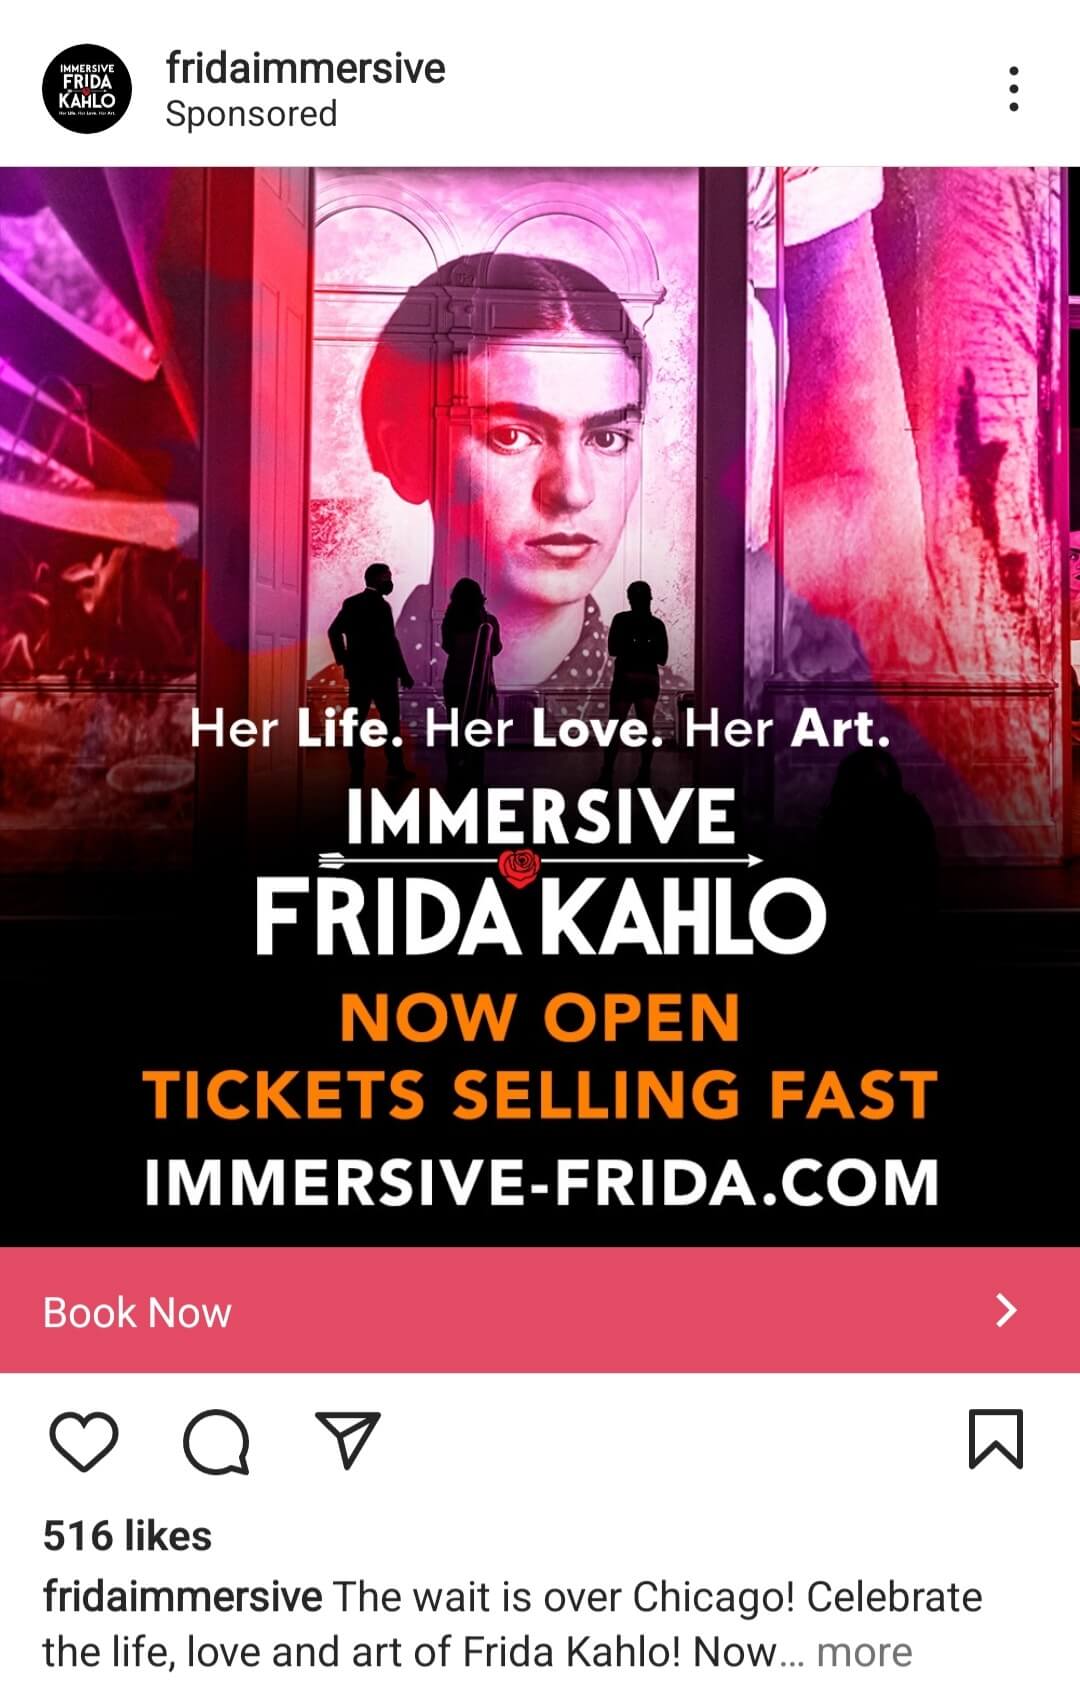 An Instagram ad for an immersive Frida Kahlo exhibit